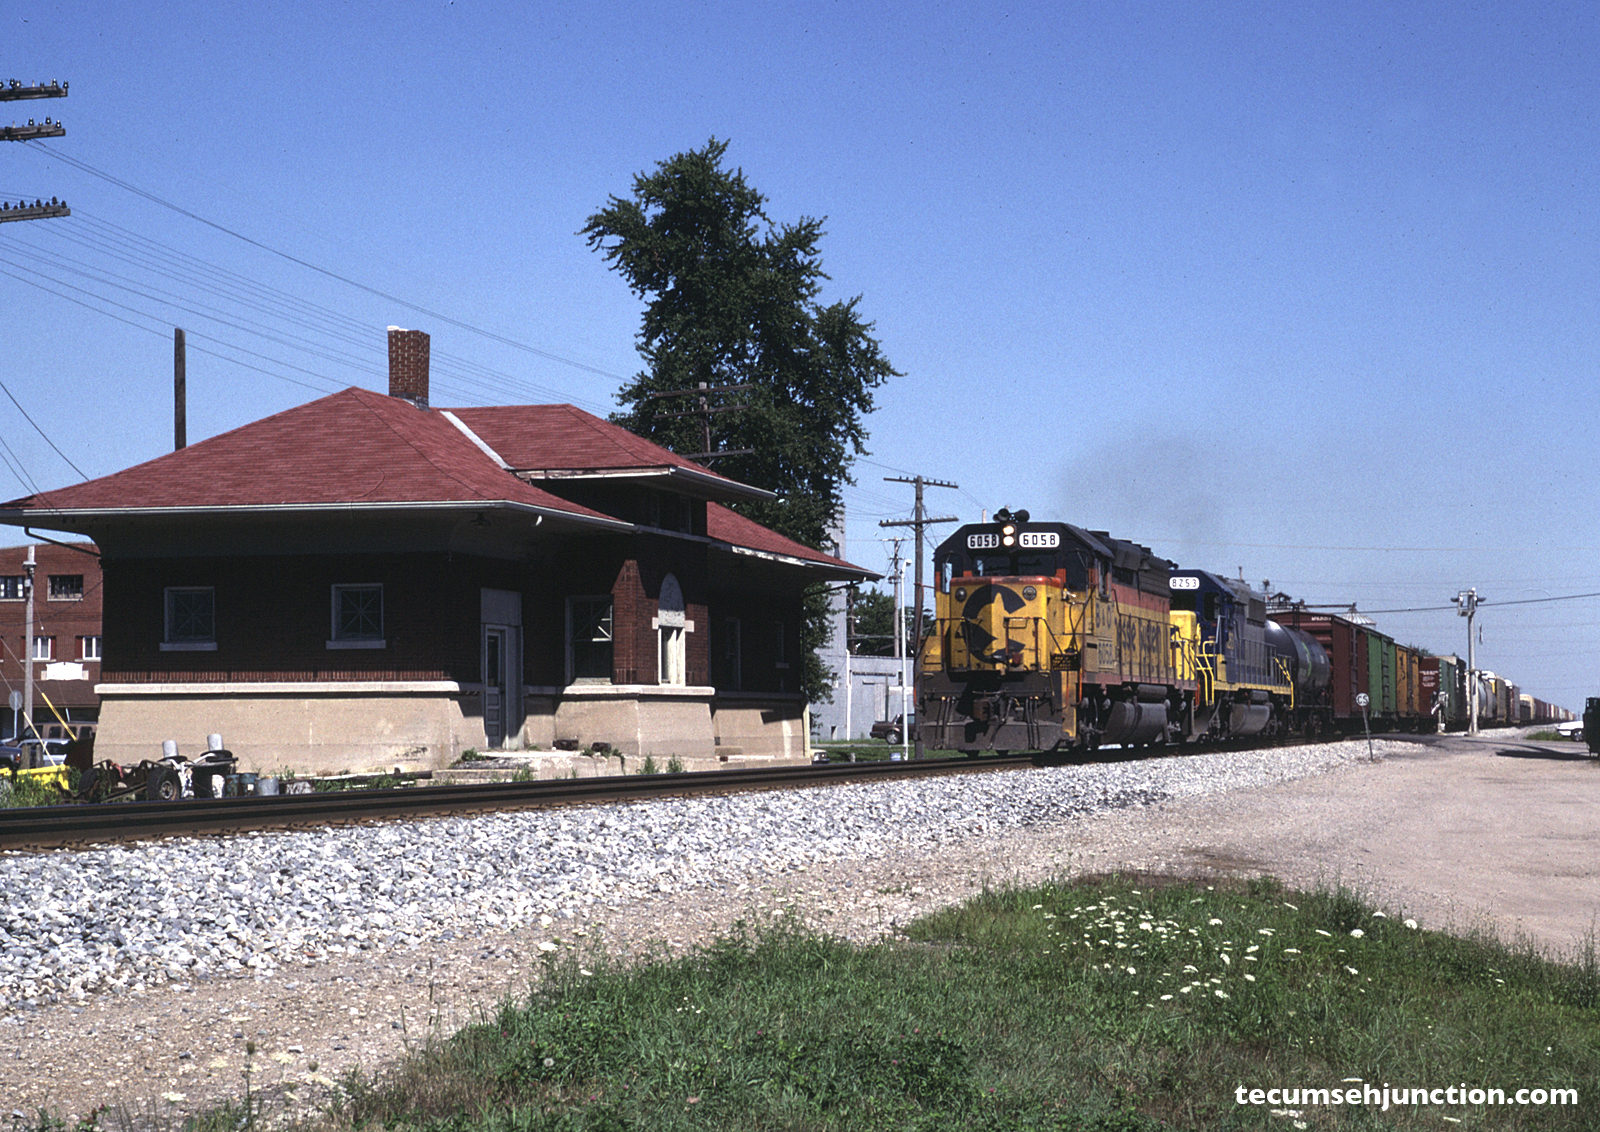 B&O 6058 leads a westbound train at Nappanee, IN